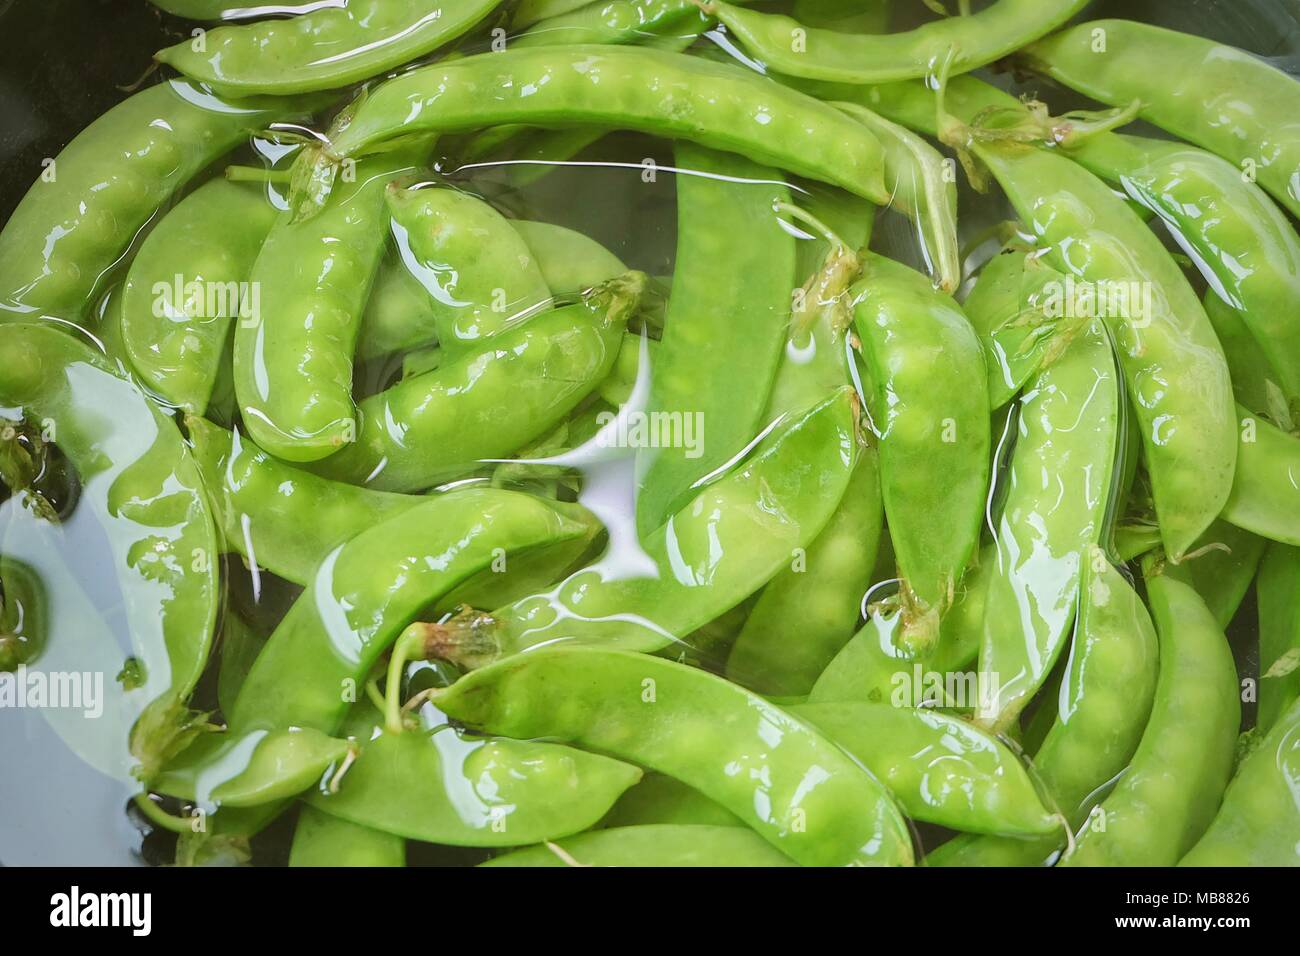 Vegetable, Fresh Green Peas Pods in Clean Water, High in Vitamin K, B, C and A. Stock Photo